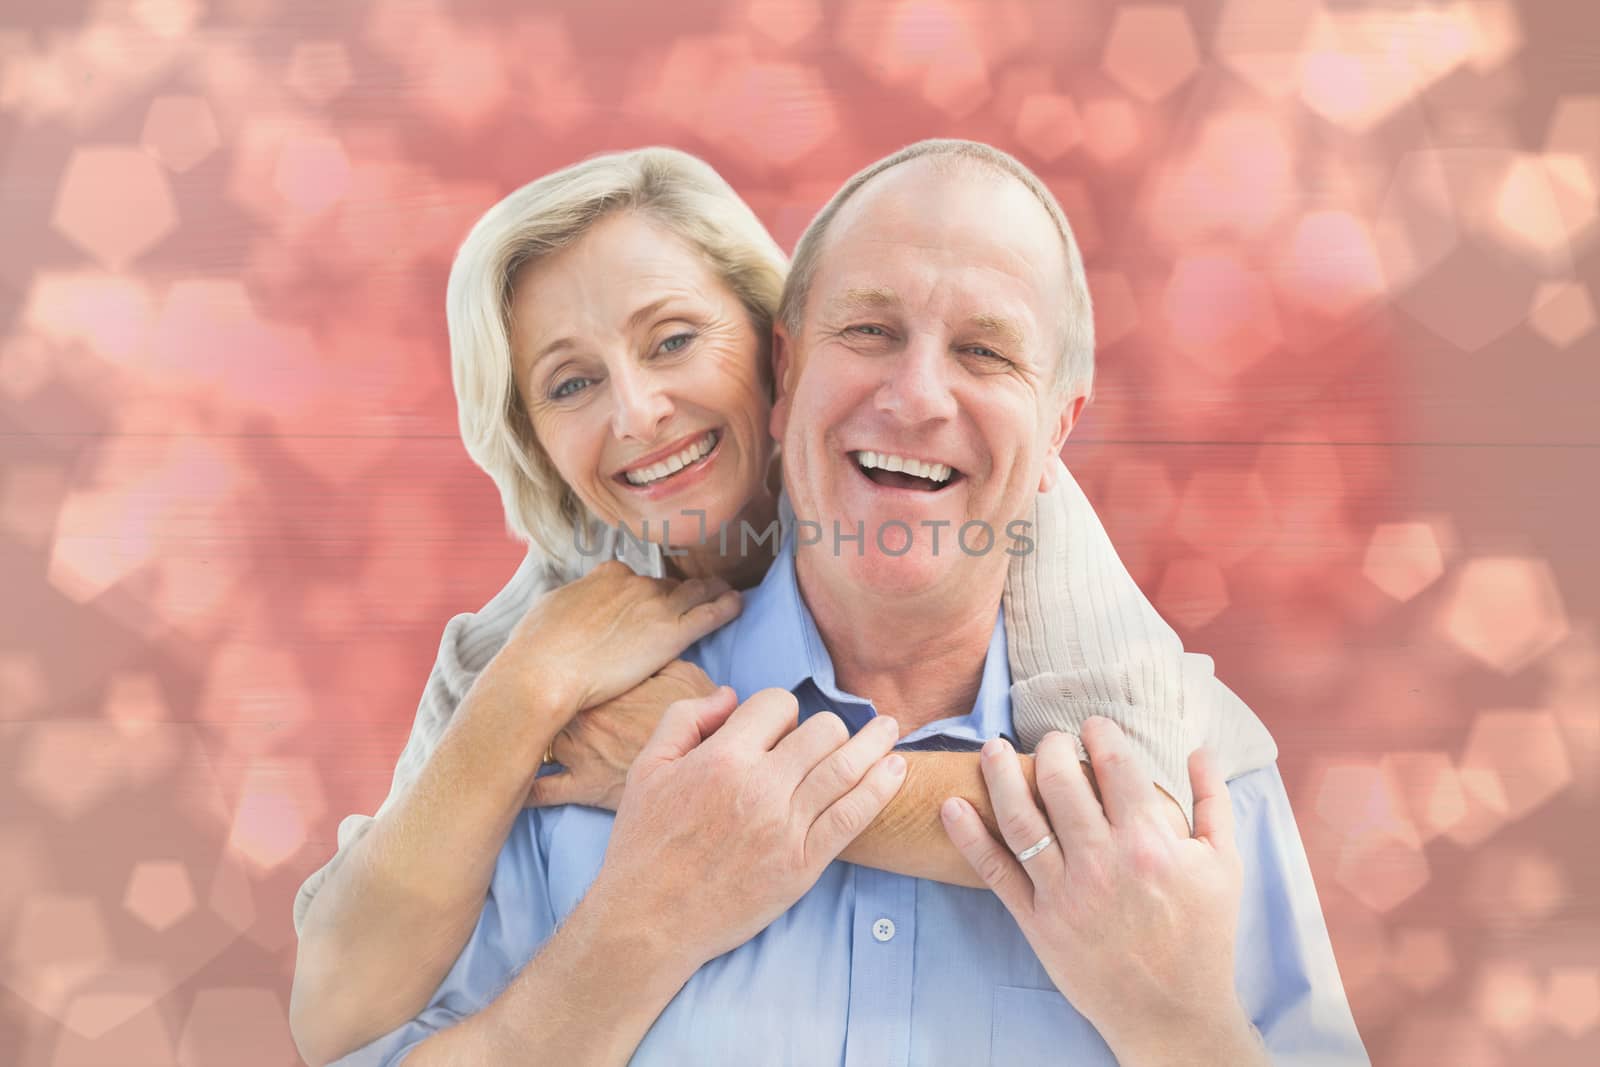 Composite image of happy mature couple embracing smiling at camera by Wavebreakmedia